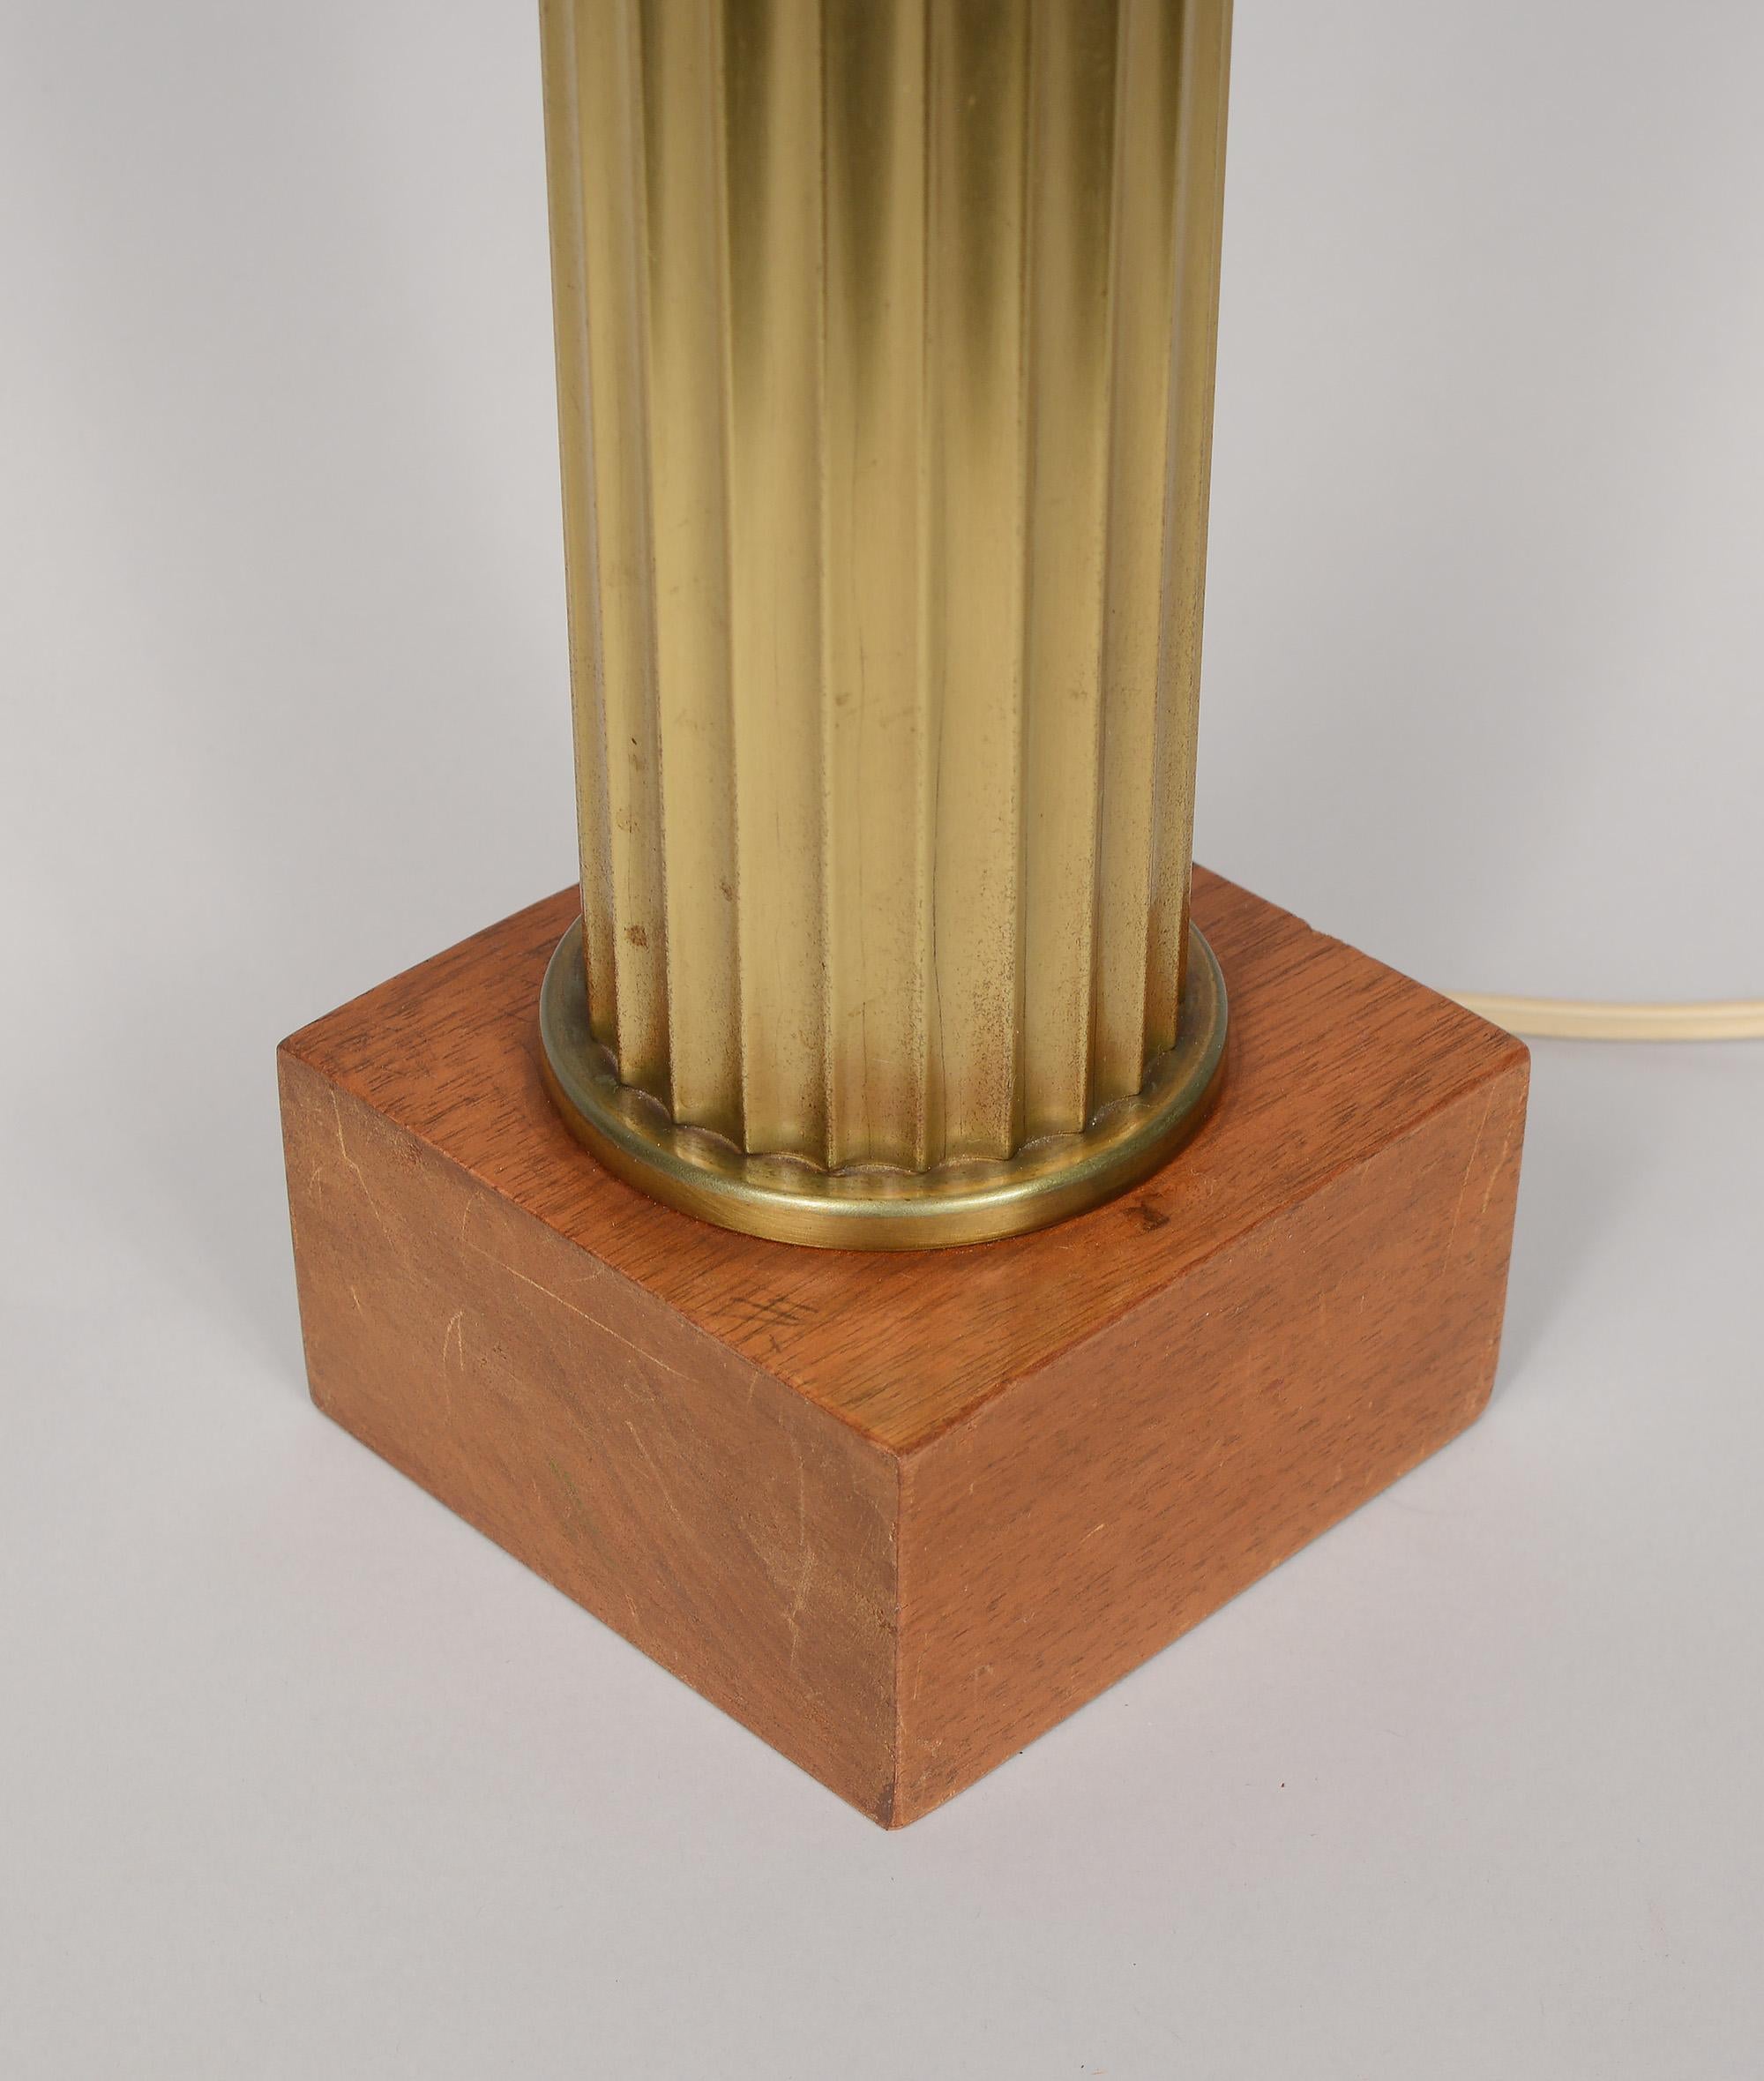 Art Deco Desk or Table Lamp with Fluted Brass Column In Good Condition For Sale In San Mateo, CA